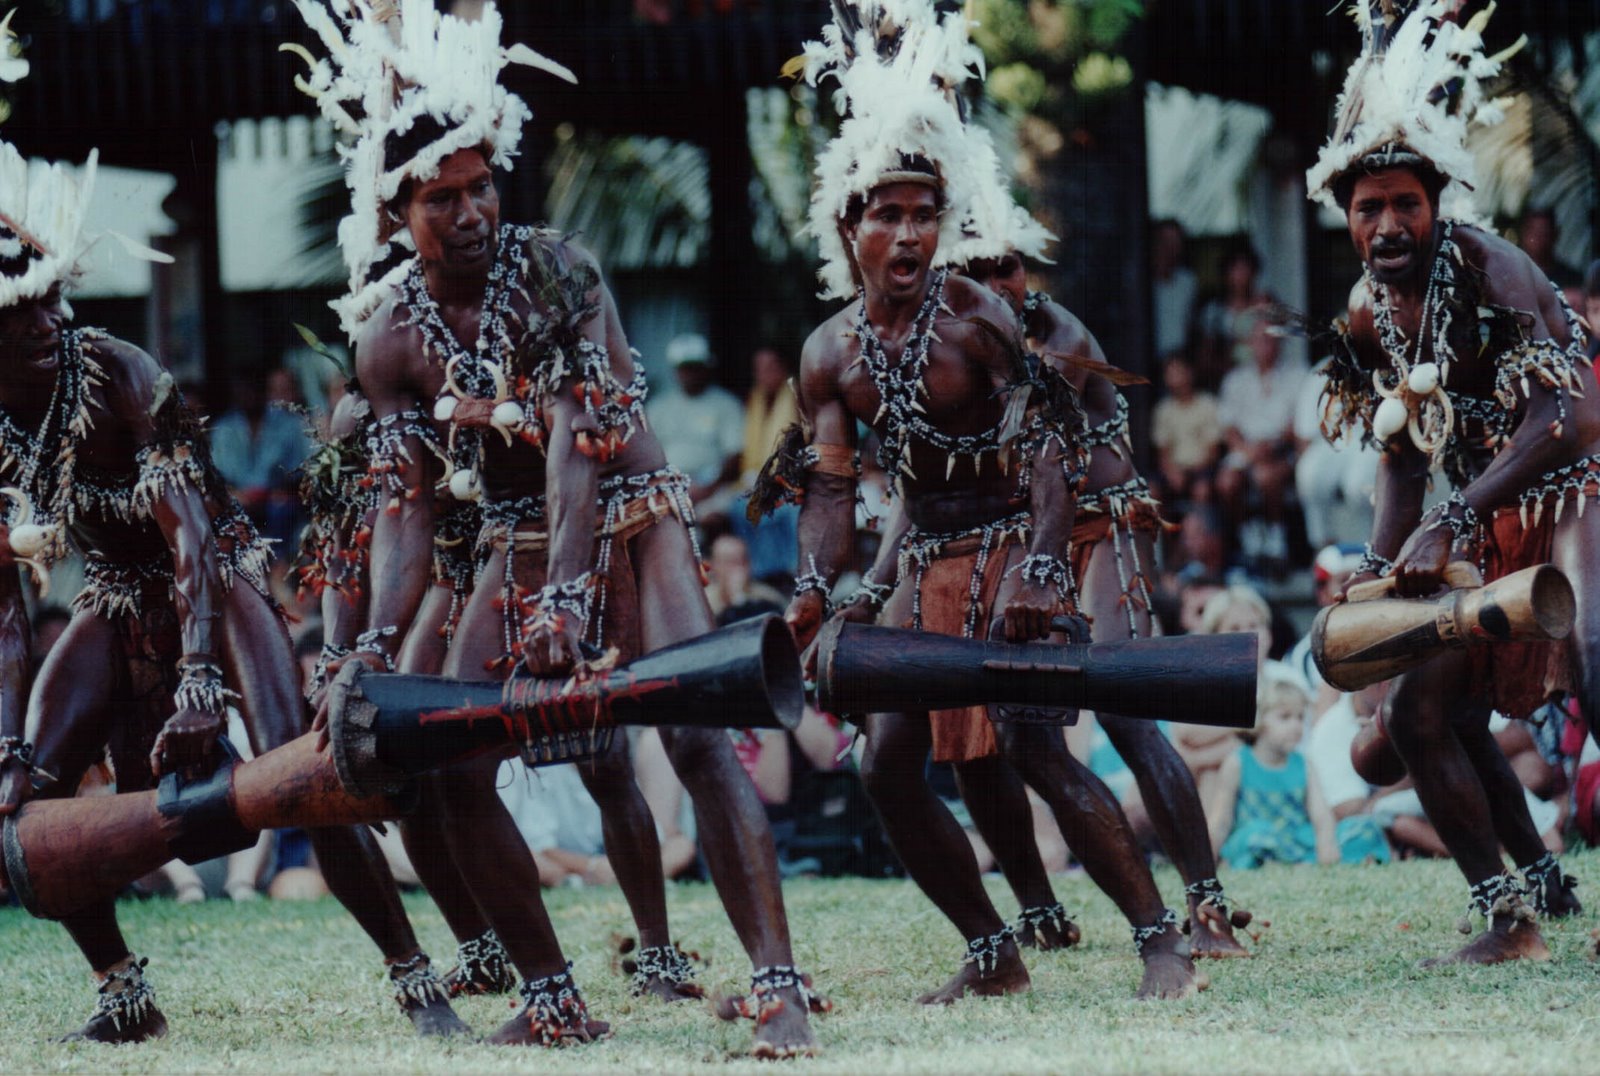 [x+Papuans+with+Drums.jpg]